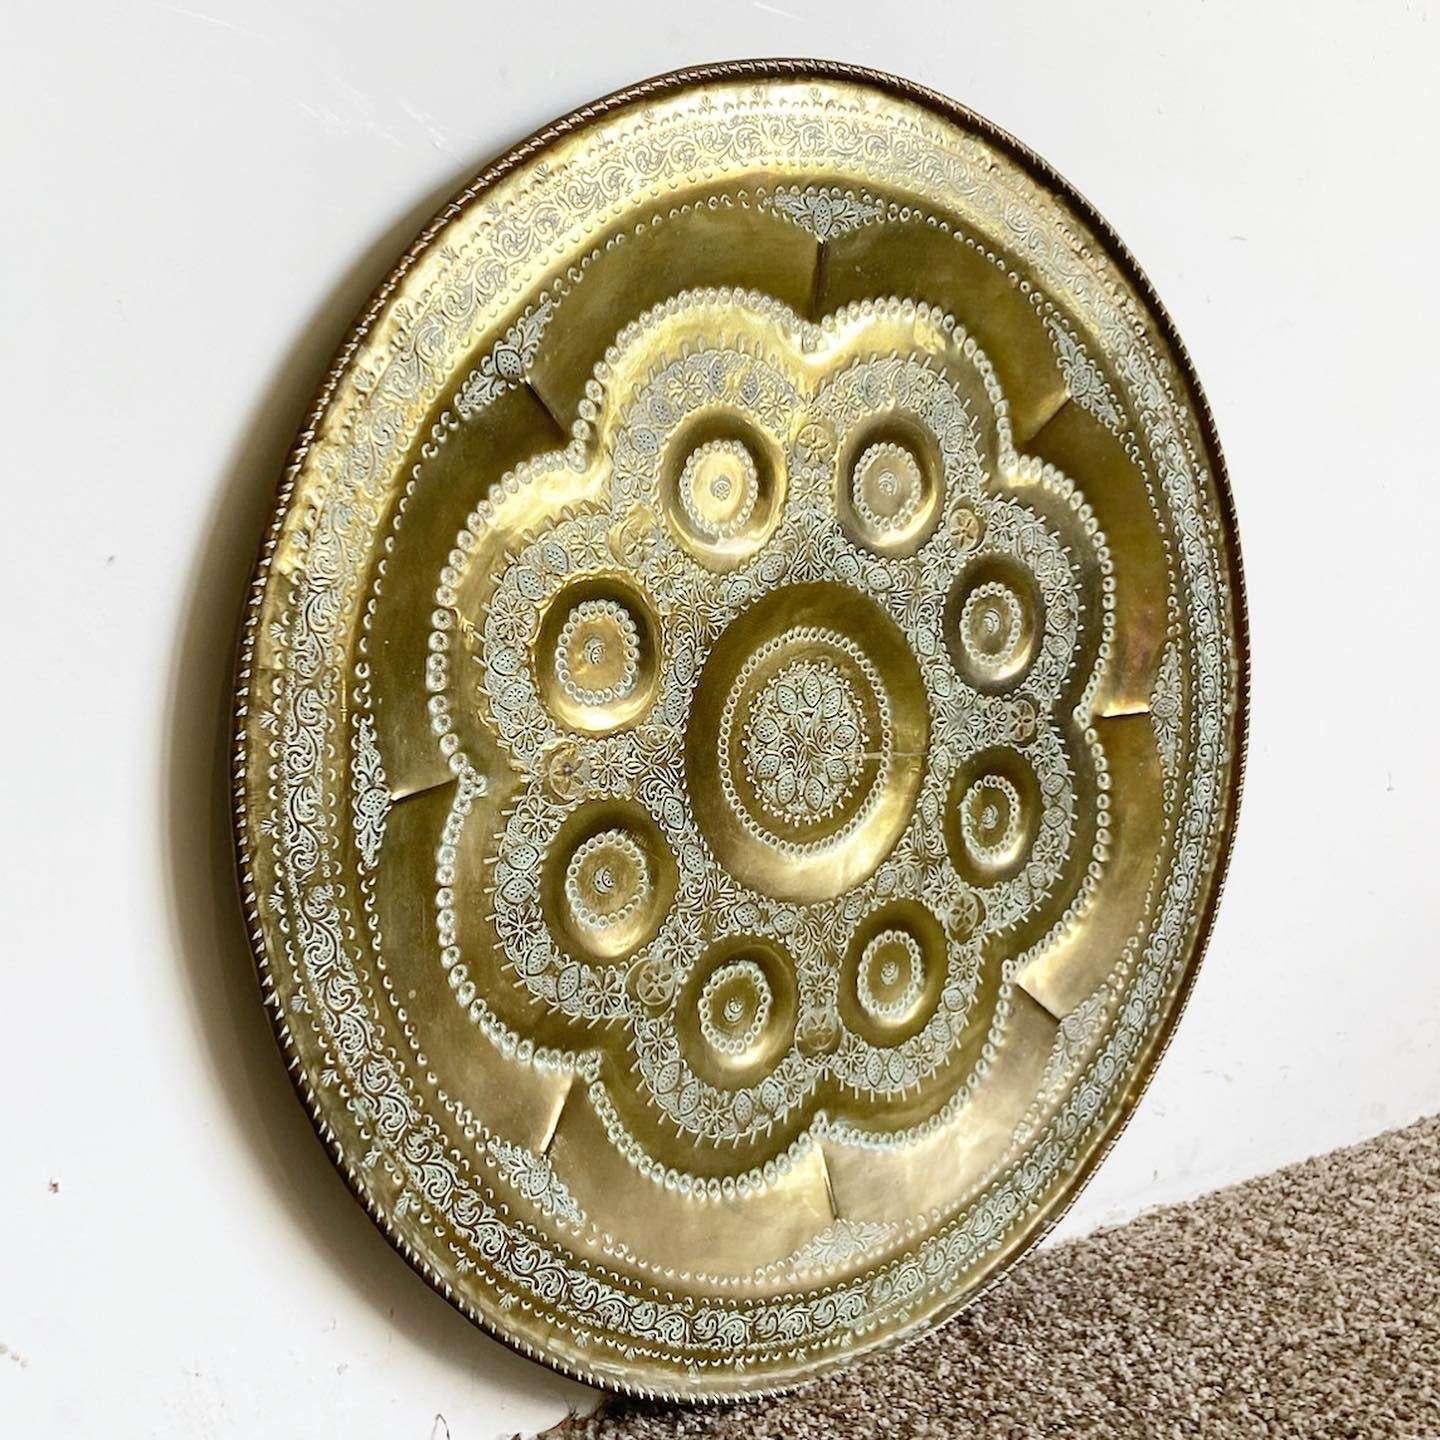 Wonderful vintage Moroccan brass serving platter. Features ornate hand crafted designs.
